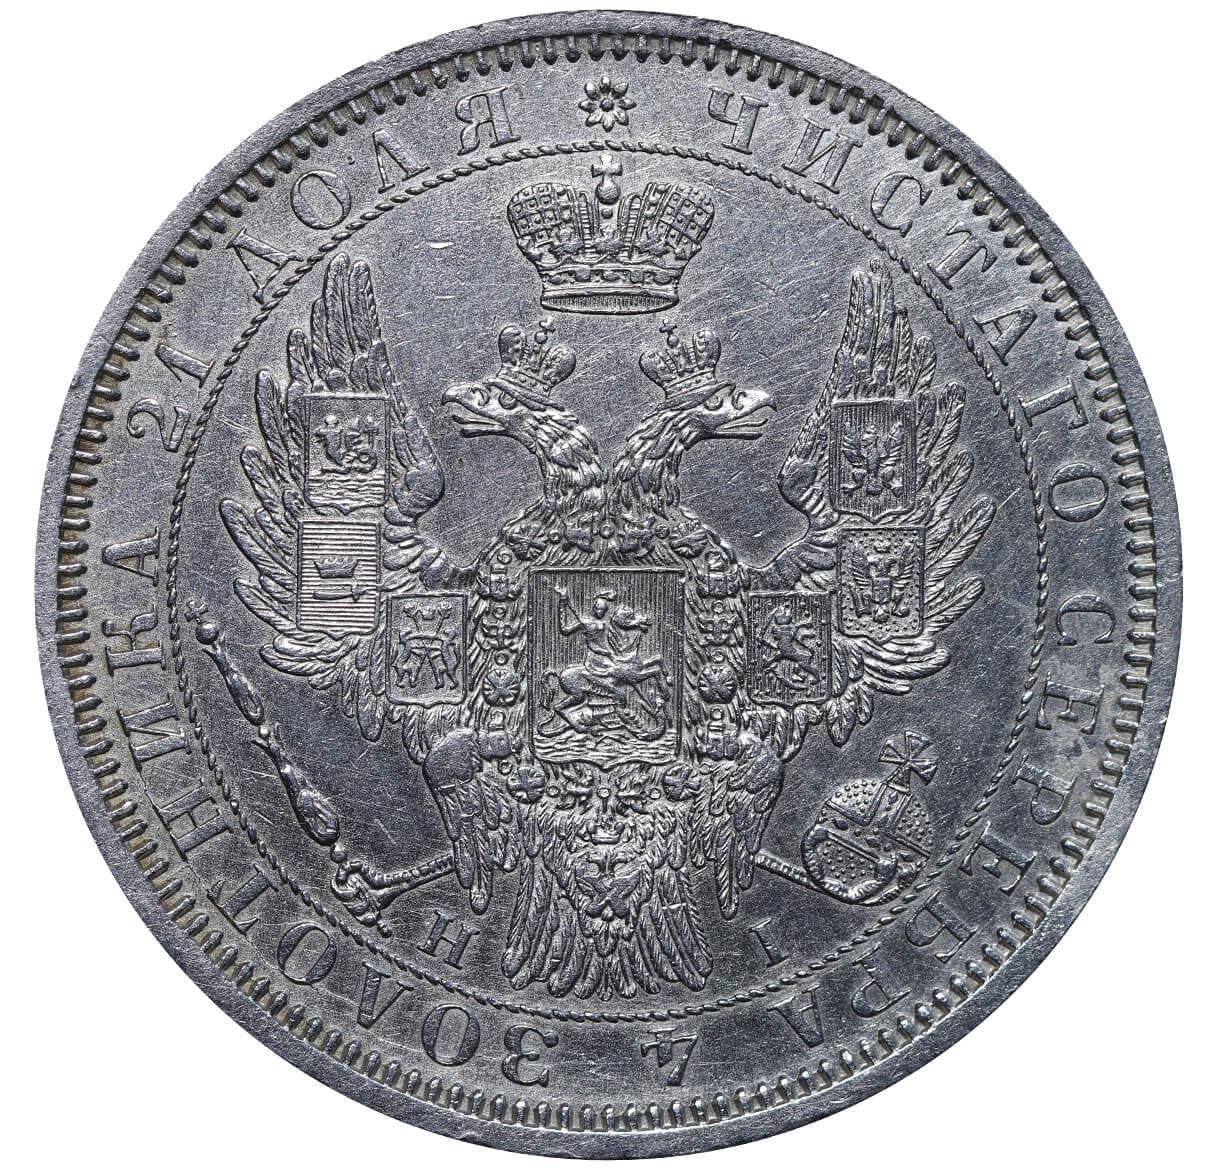 Russian Empire, 1 Rouble, 1855 year, SPB-NI - Image 3 of 3